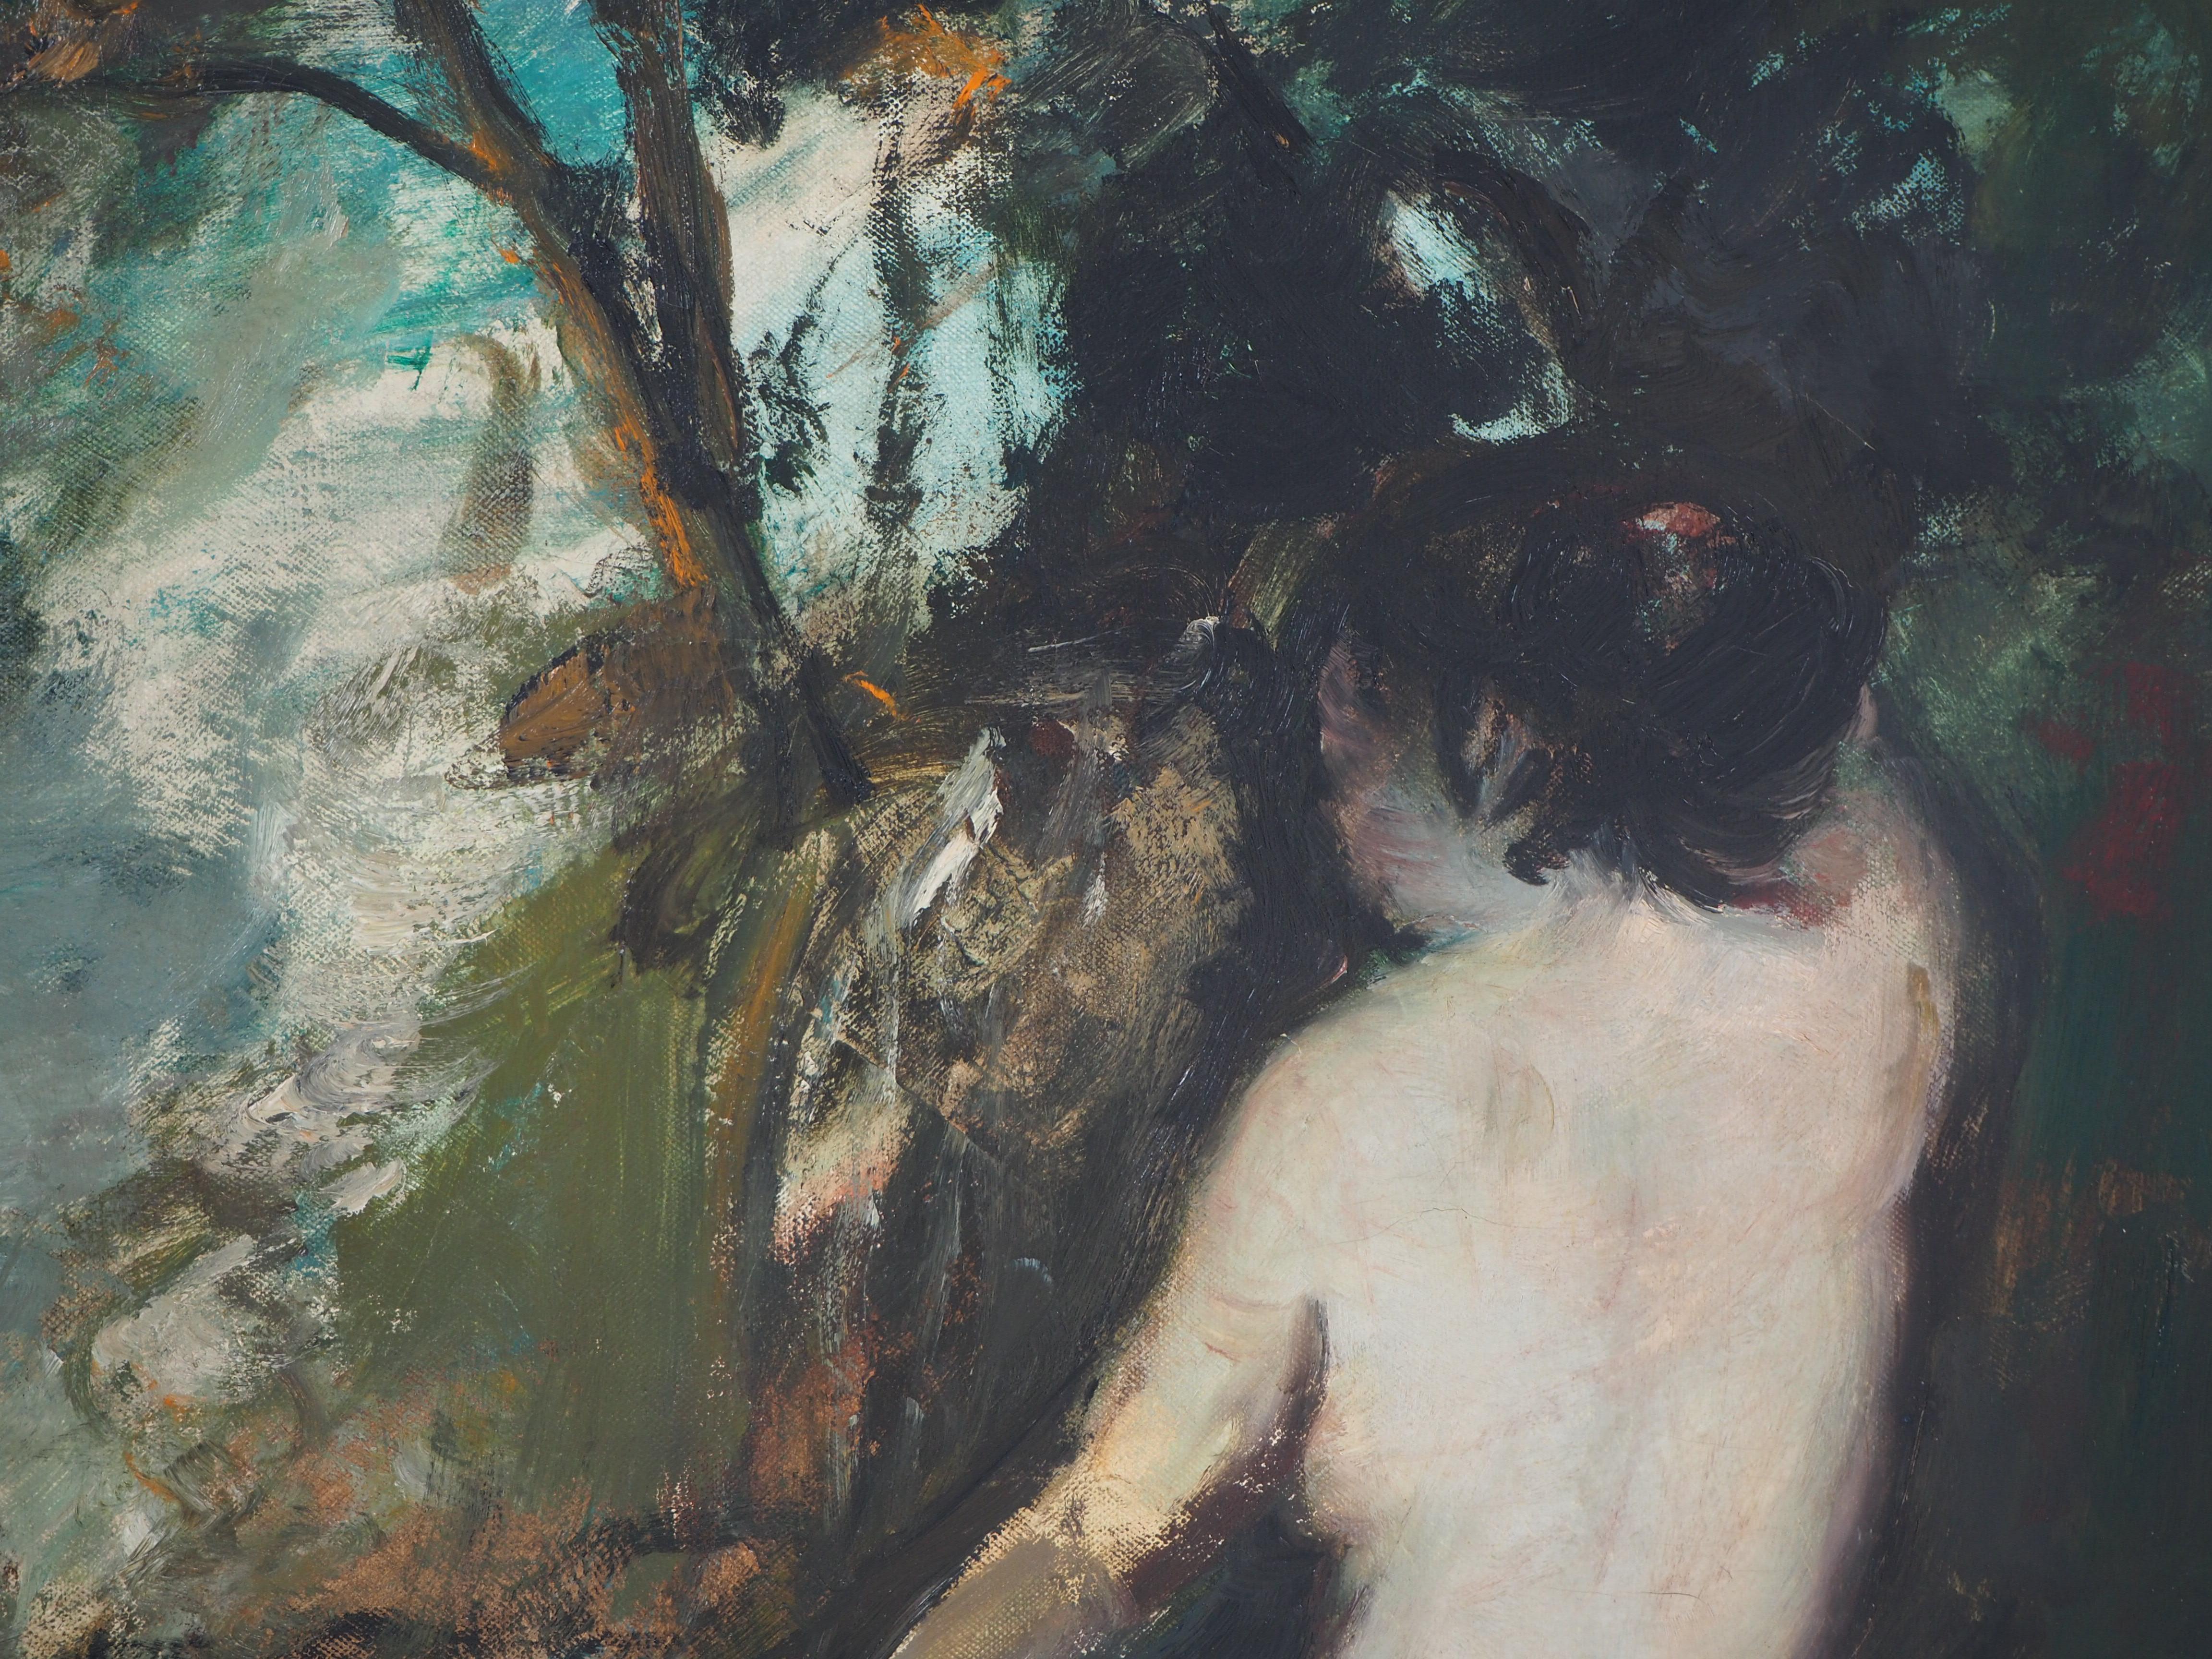 Nude near the Source (Study after Courbet)  - Original Oil on canvas, Signed - Gray Figurative Painting by François Heaulmé